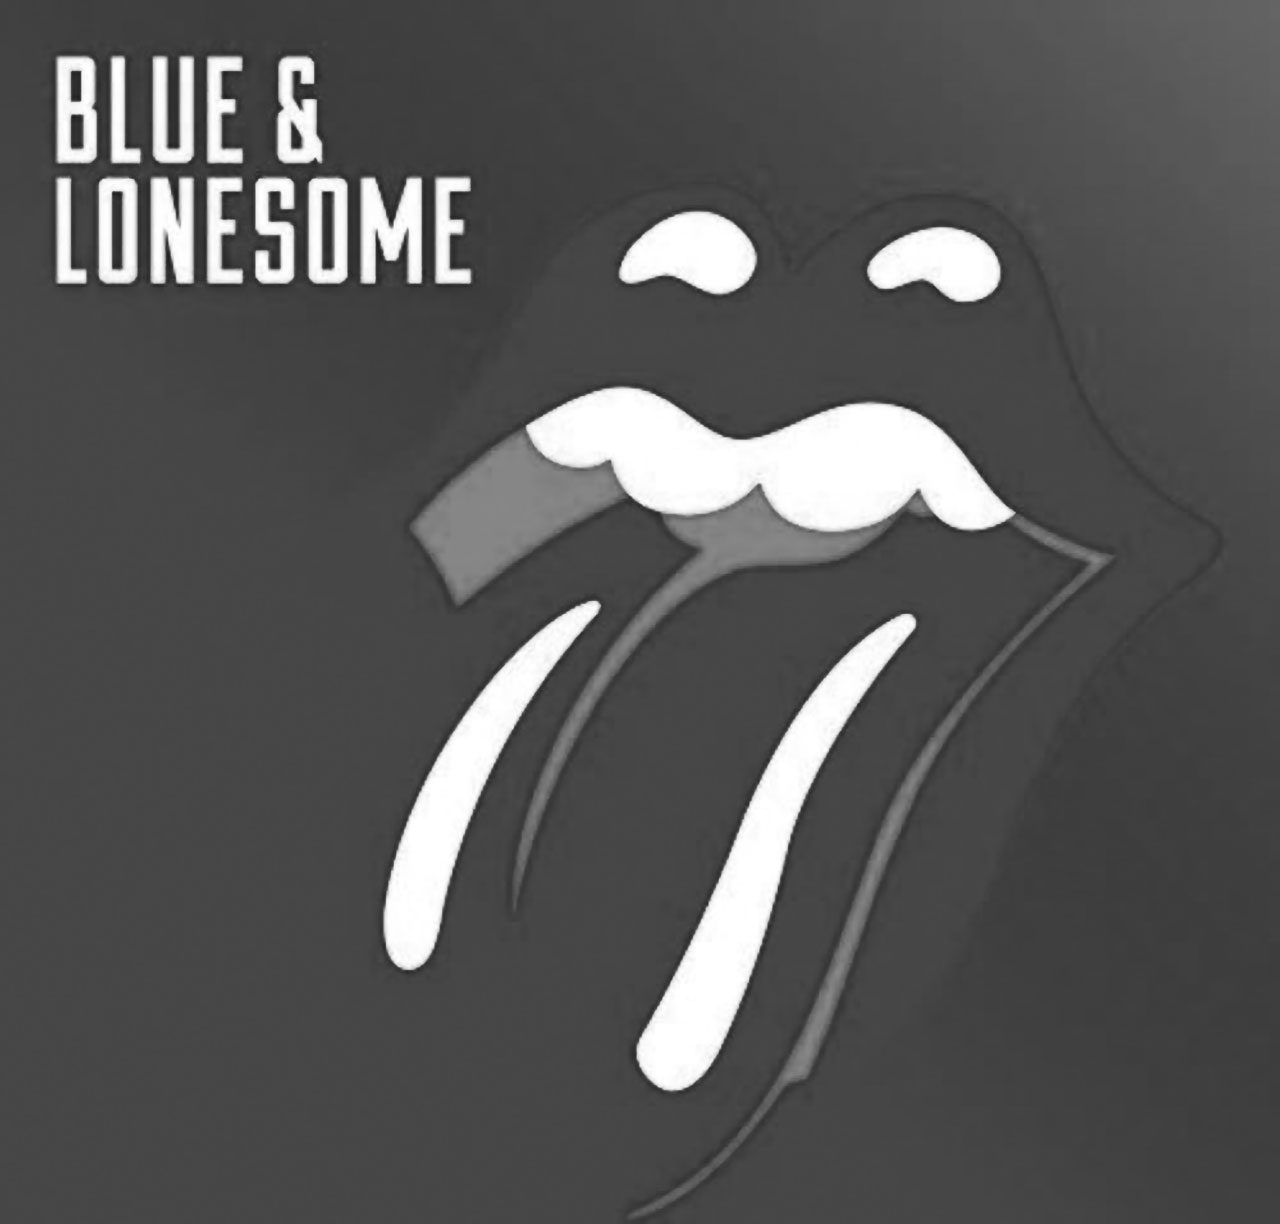 The Rolling Stones Blue & Lonesome